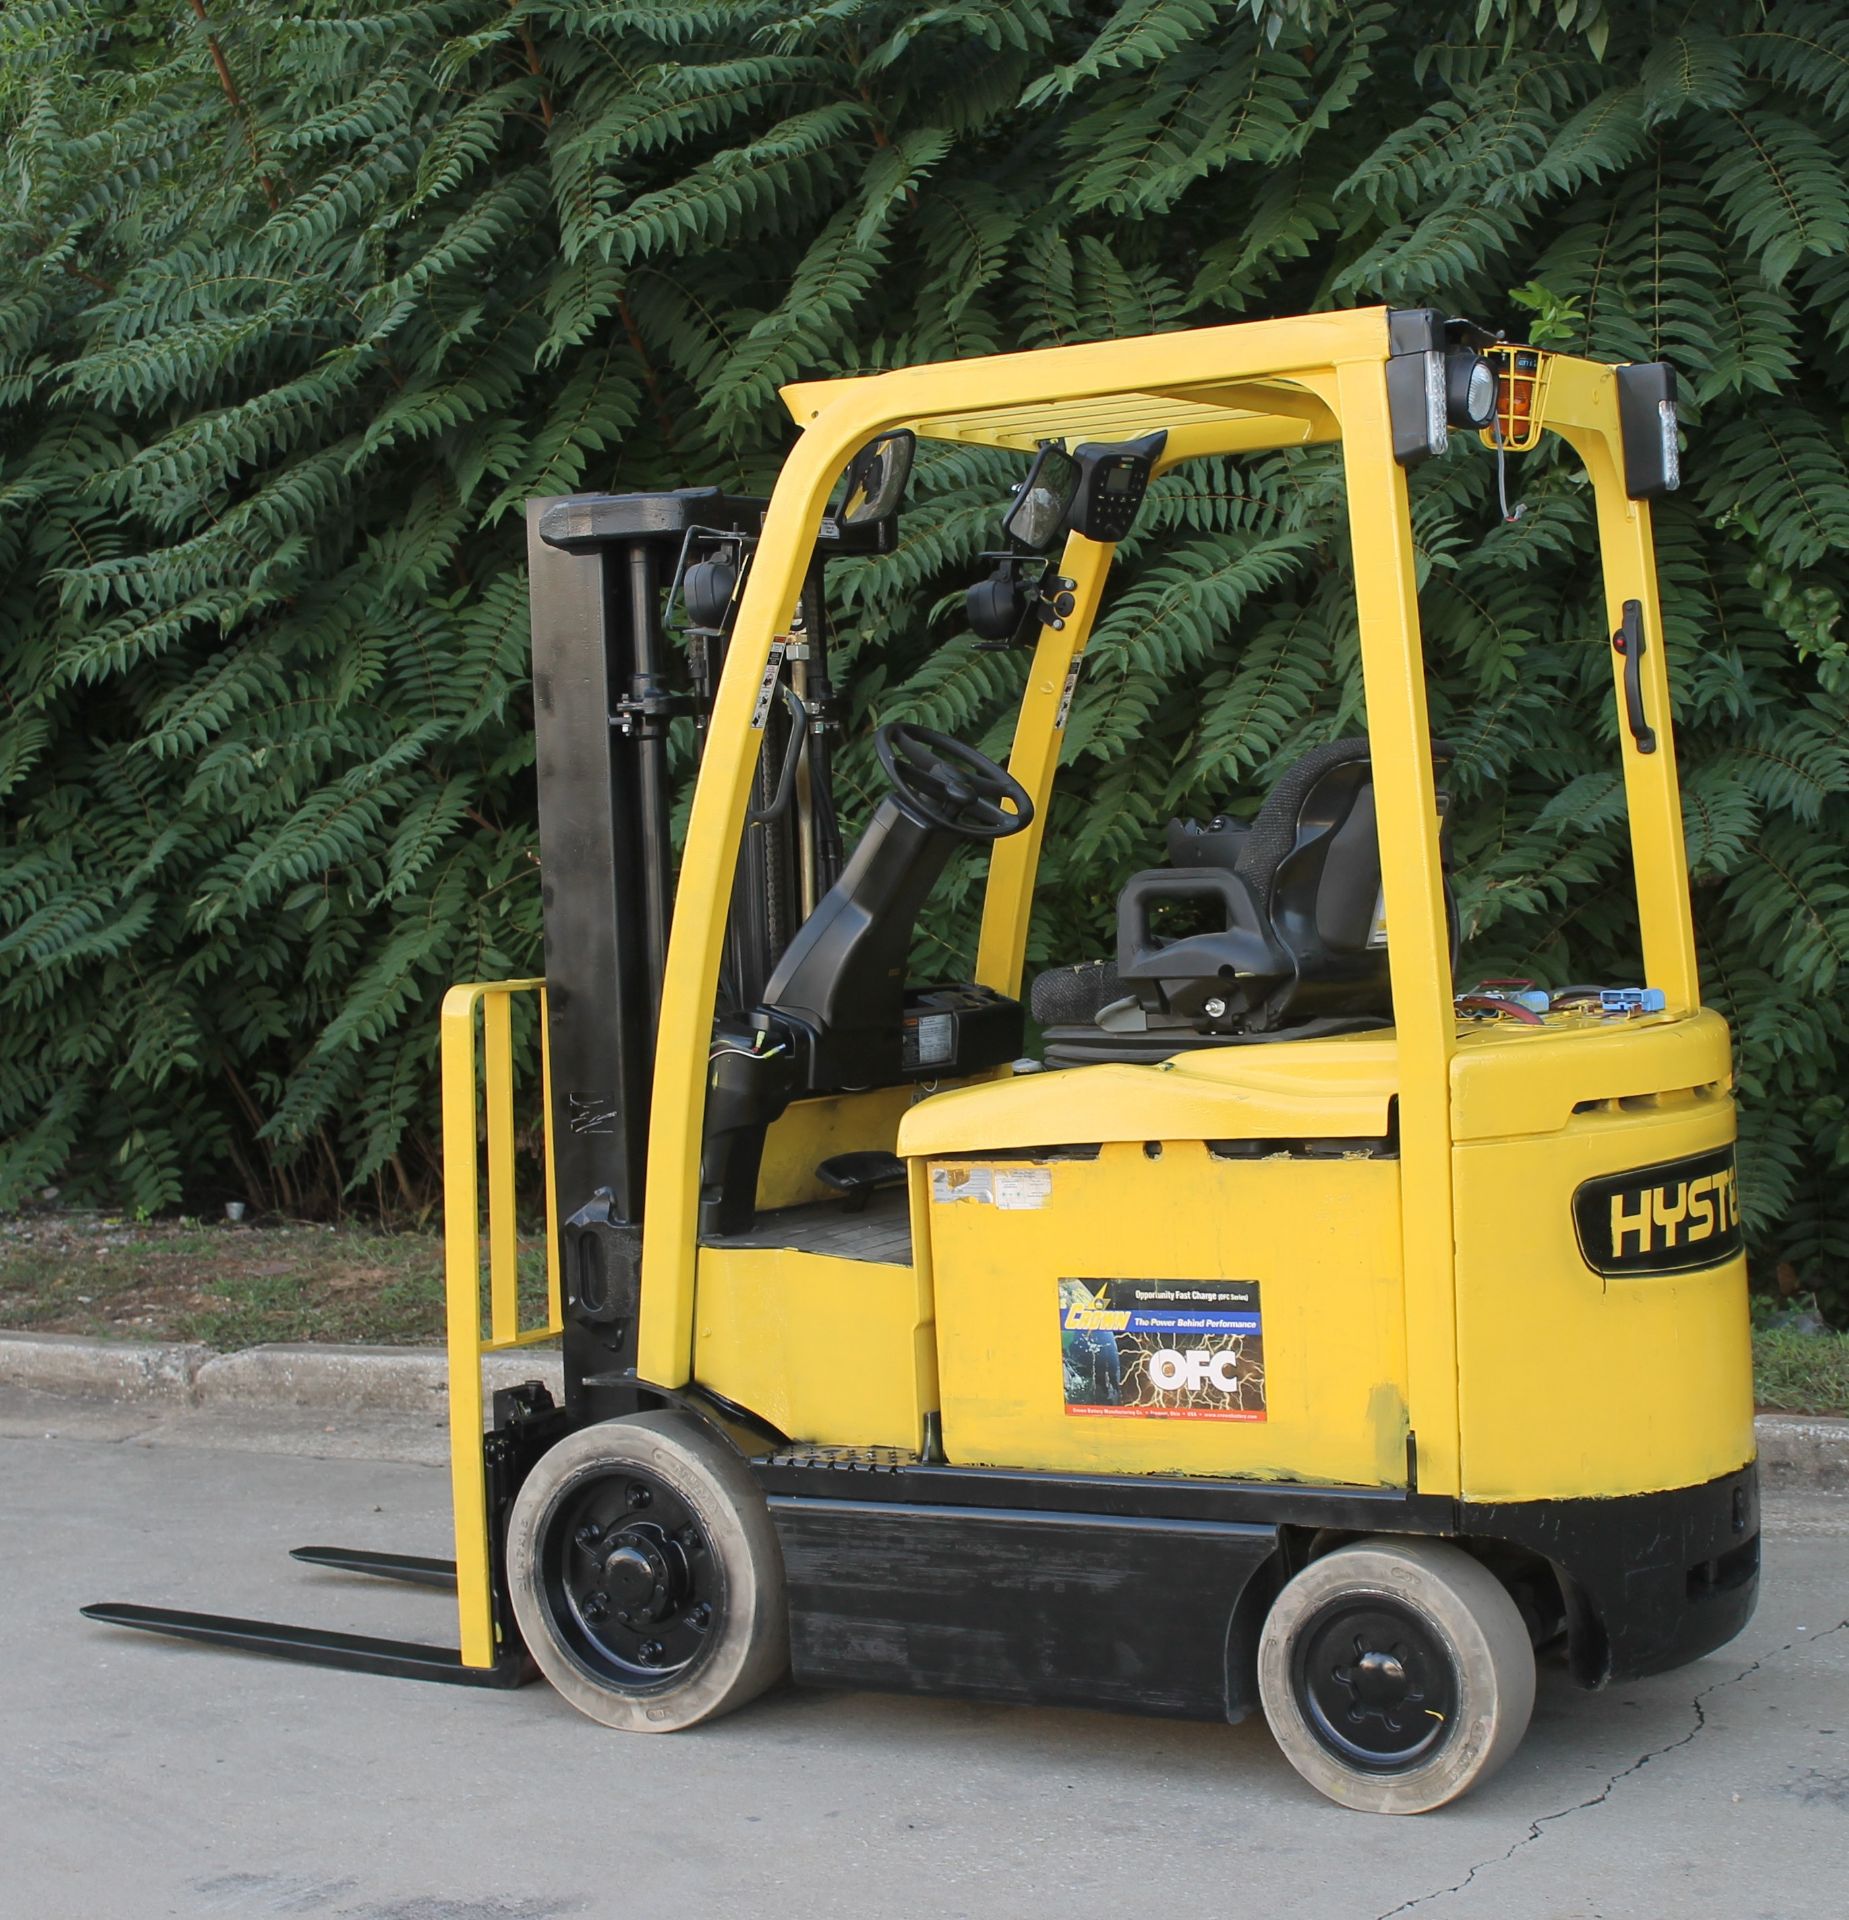 2012 HYSTER 5000 LBS. CAPACITY ELECTRIC FORKLIFT WITH 48 VOLTS BATTERY CHARGER, CLICK TO WATCH VIDEO - Image 6 of 9